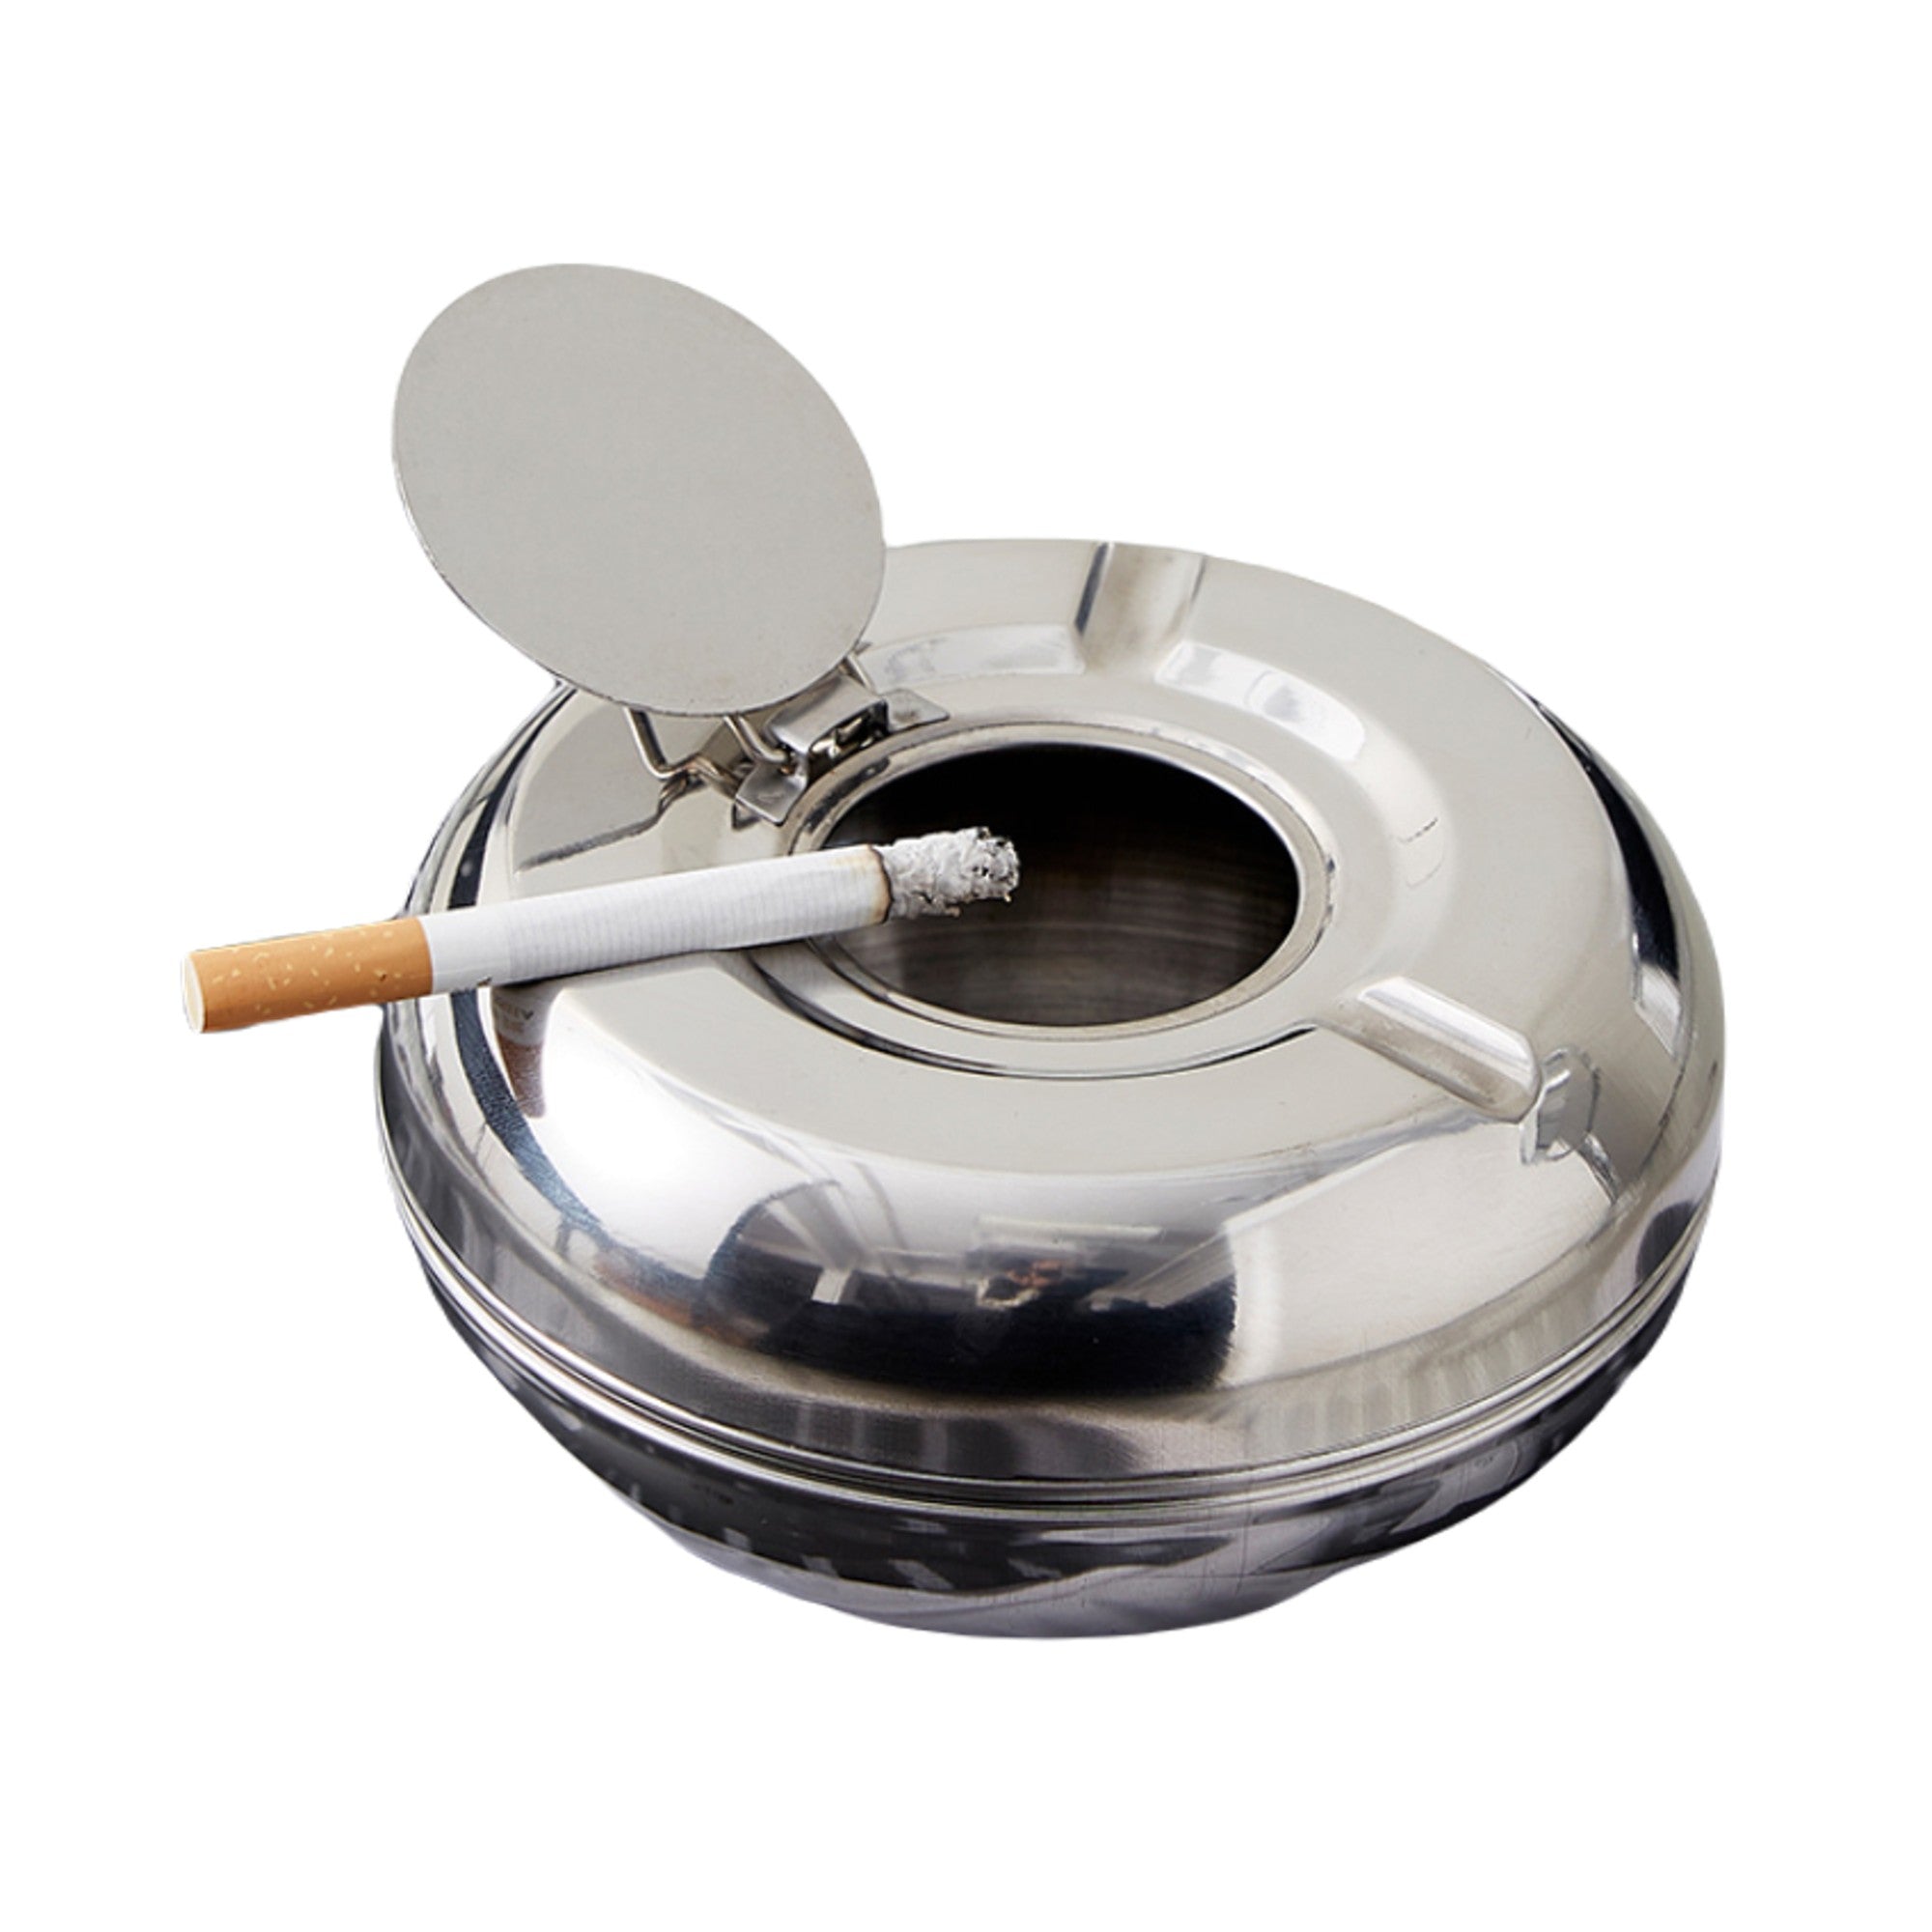 Ash Tray, Large Outdoor Ashtray with Lid - Ashtray for Outside Patio,  Stainle